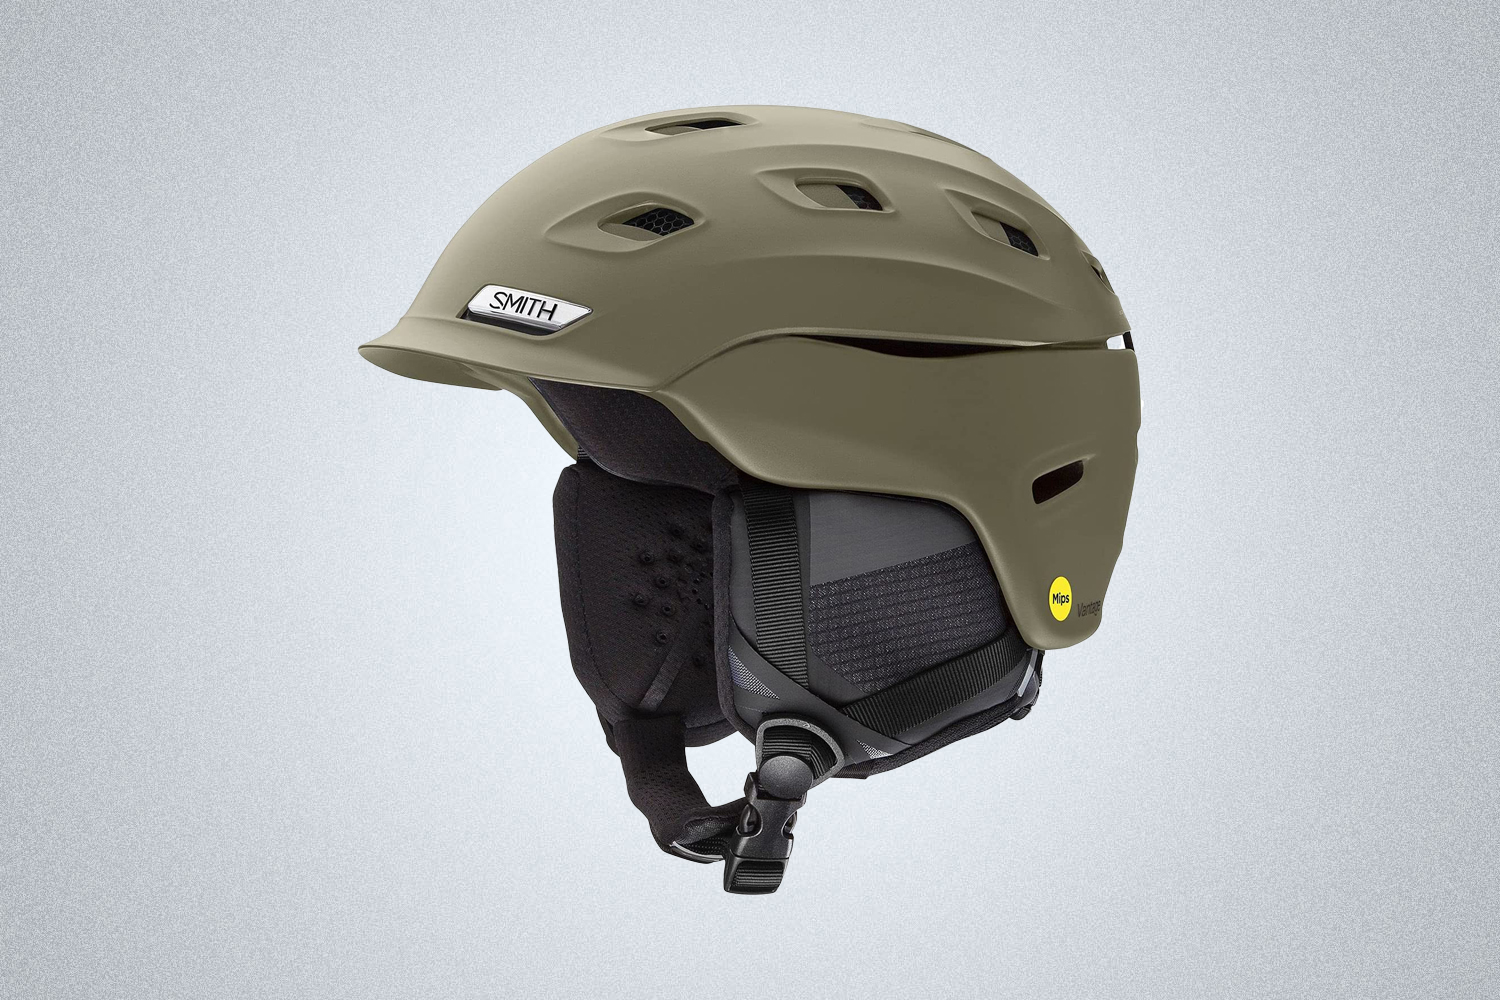 The Smith Vantage MIPS Helmet is great for skiing and snowboarding in winter of 2022 and beyond